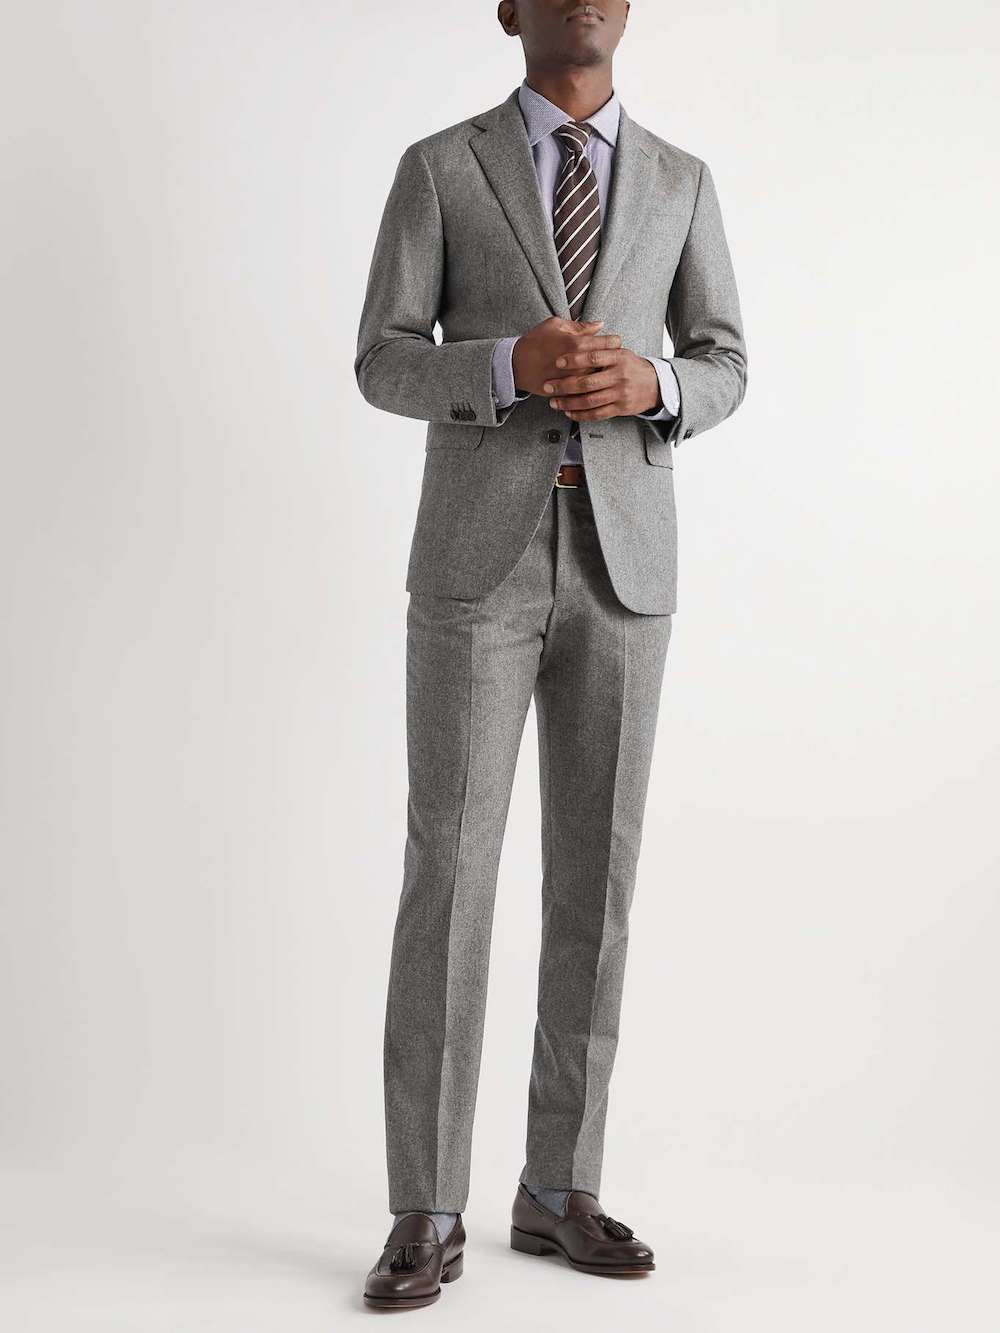 image of a man wearing a grey suit and brown dress shoes